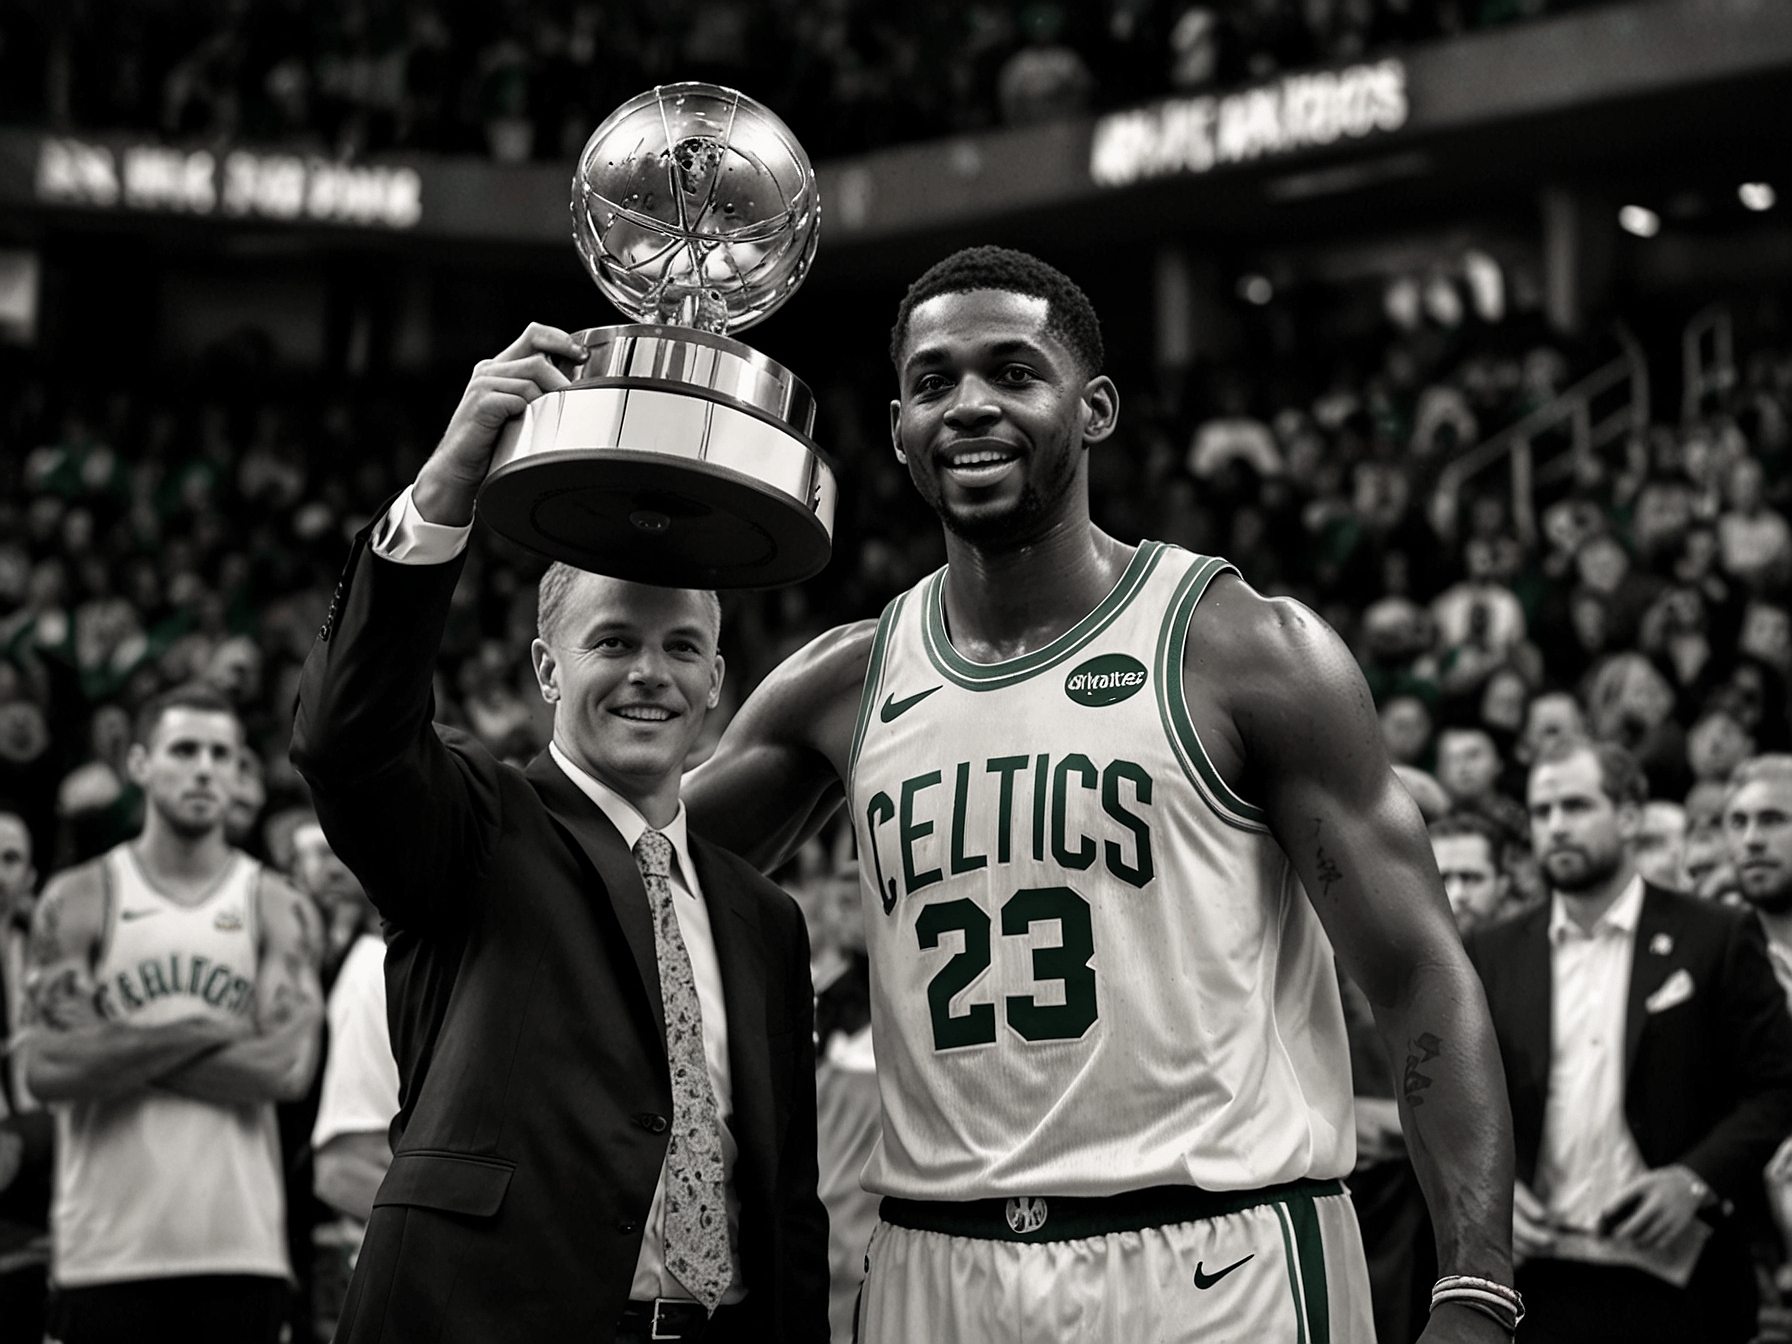 A snapshot of the series MVP of the Boston Celtics holding the championship trophy, highlighting his leadership and key contributions throughout the season and the play-offs.